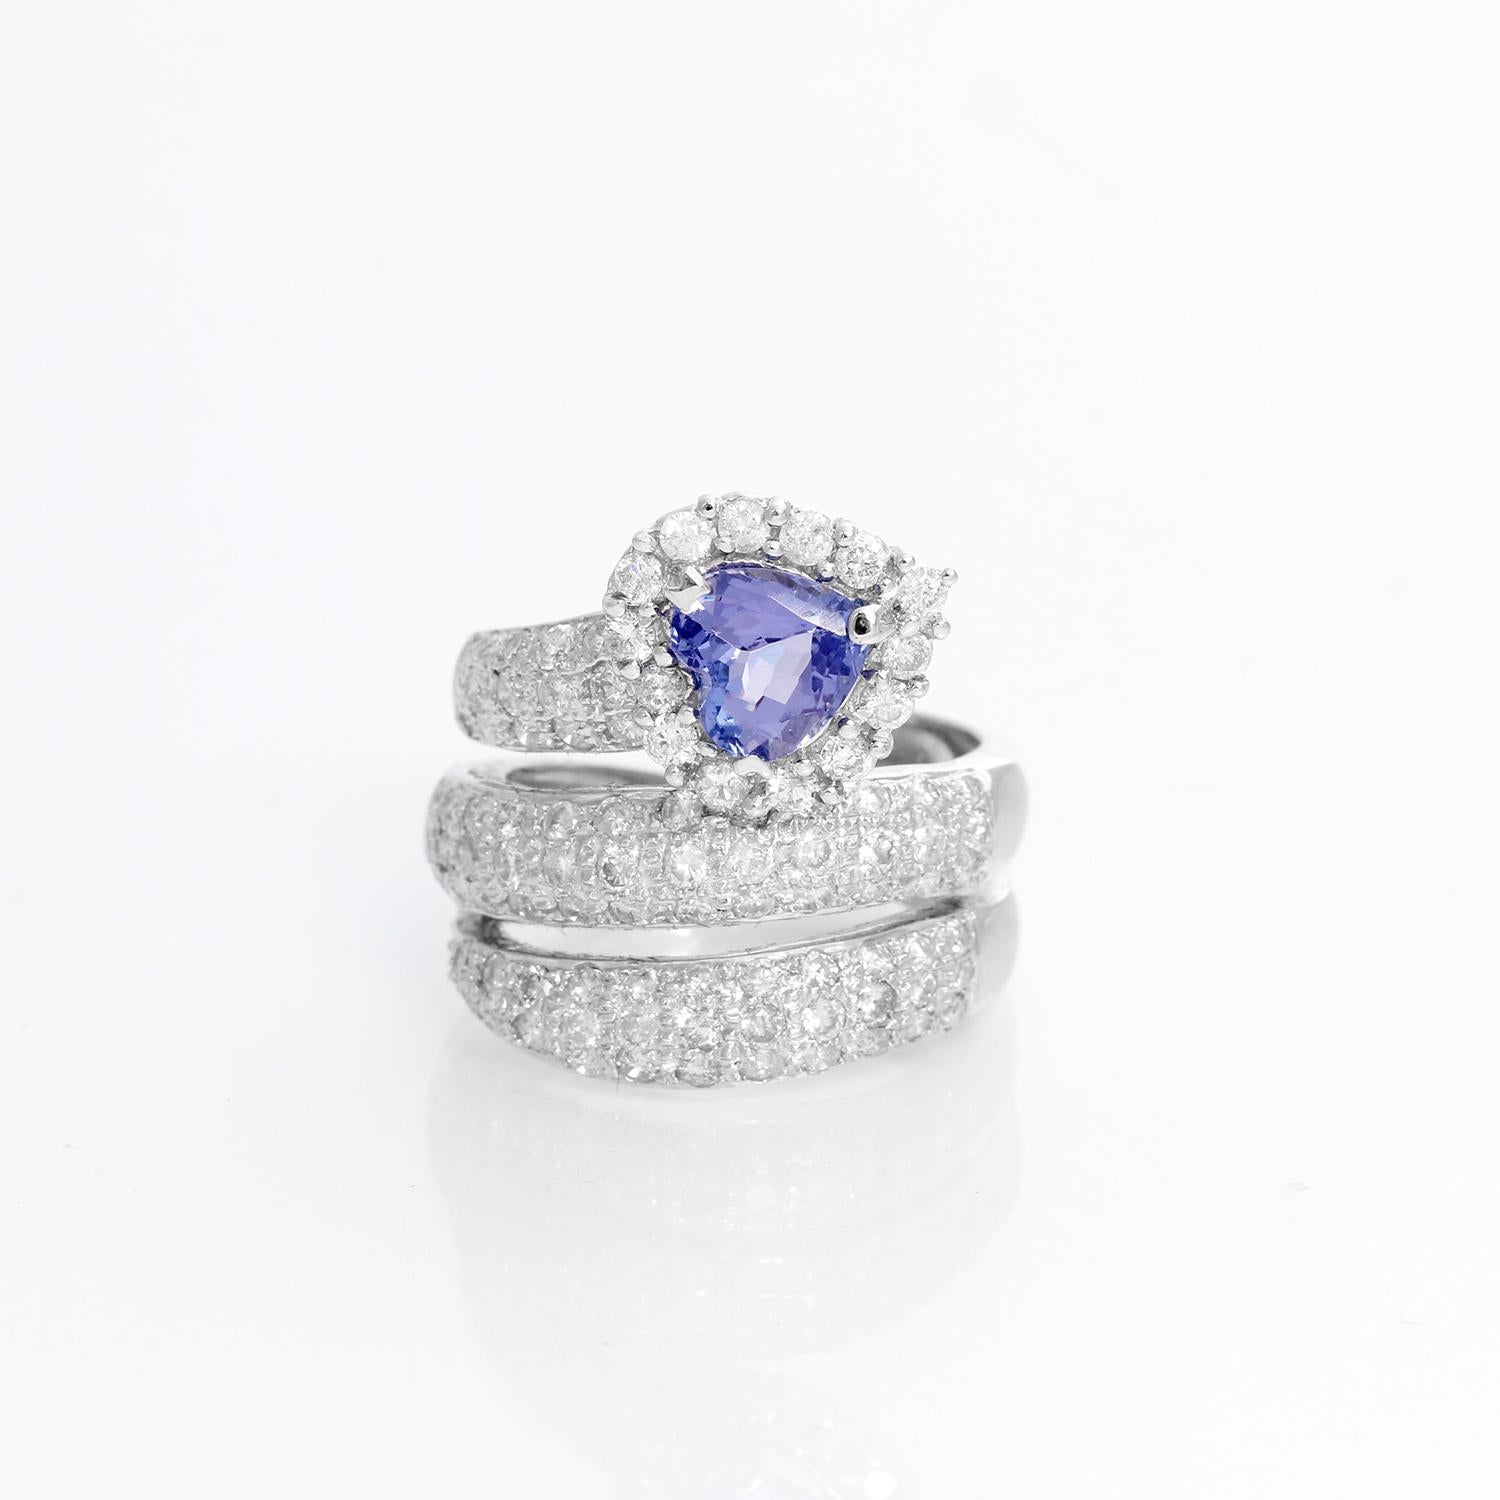 Tanzanite & Diamond White Gold Ring Size 6 - A serpentine design with round brilliant cut diamonds weighing approximately weighing 2 cts. Set in 14K White Gold with a heart shaped blue Tanzanite. Size 6 .